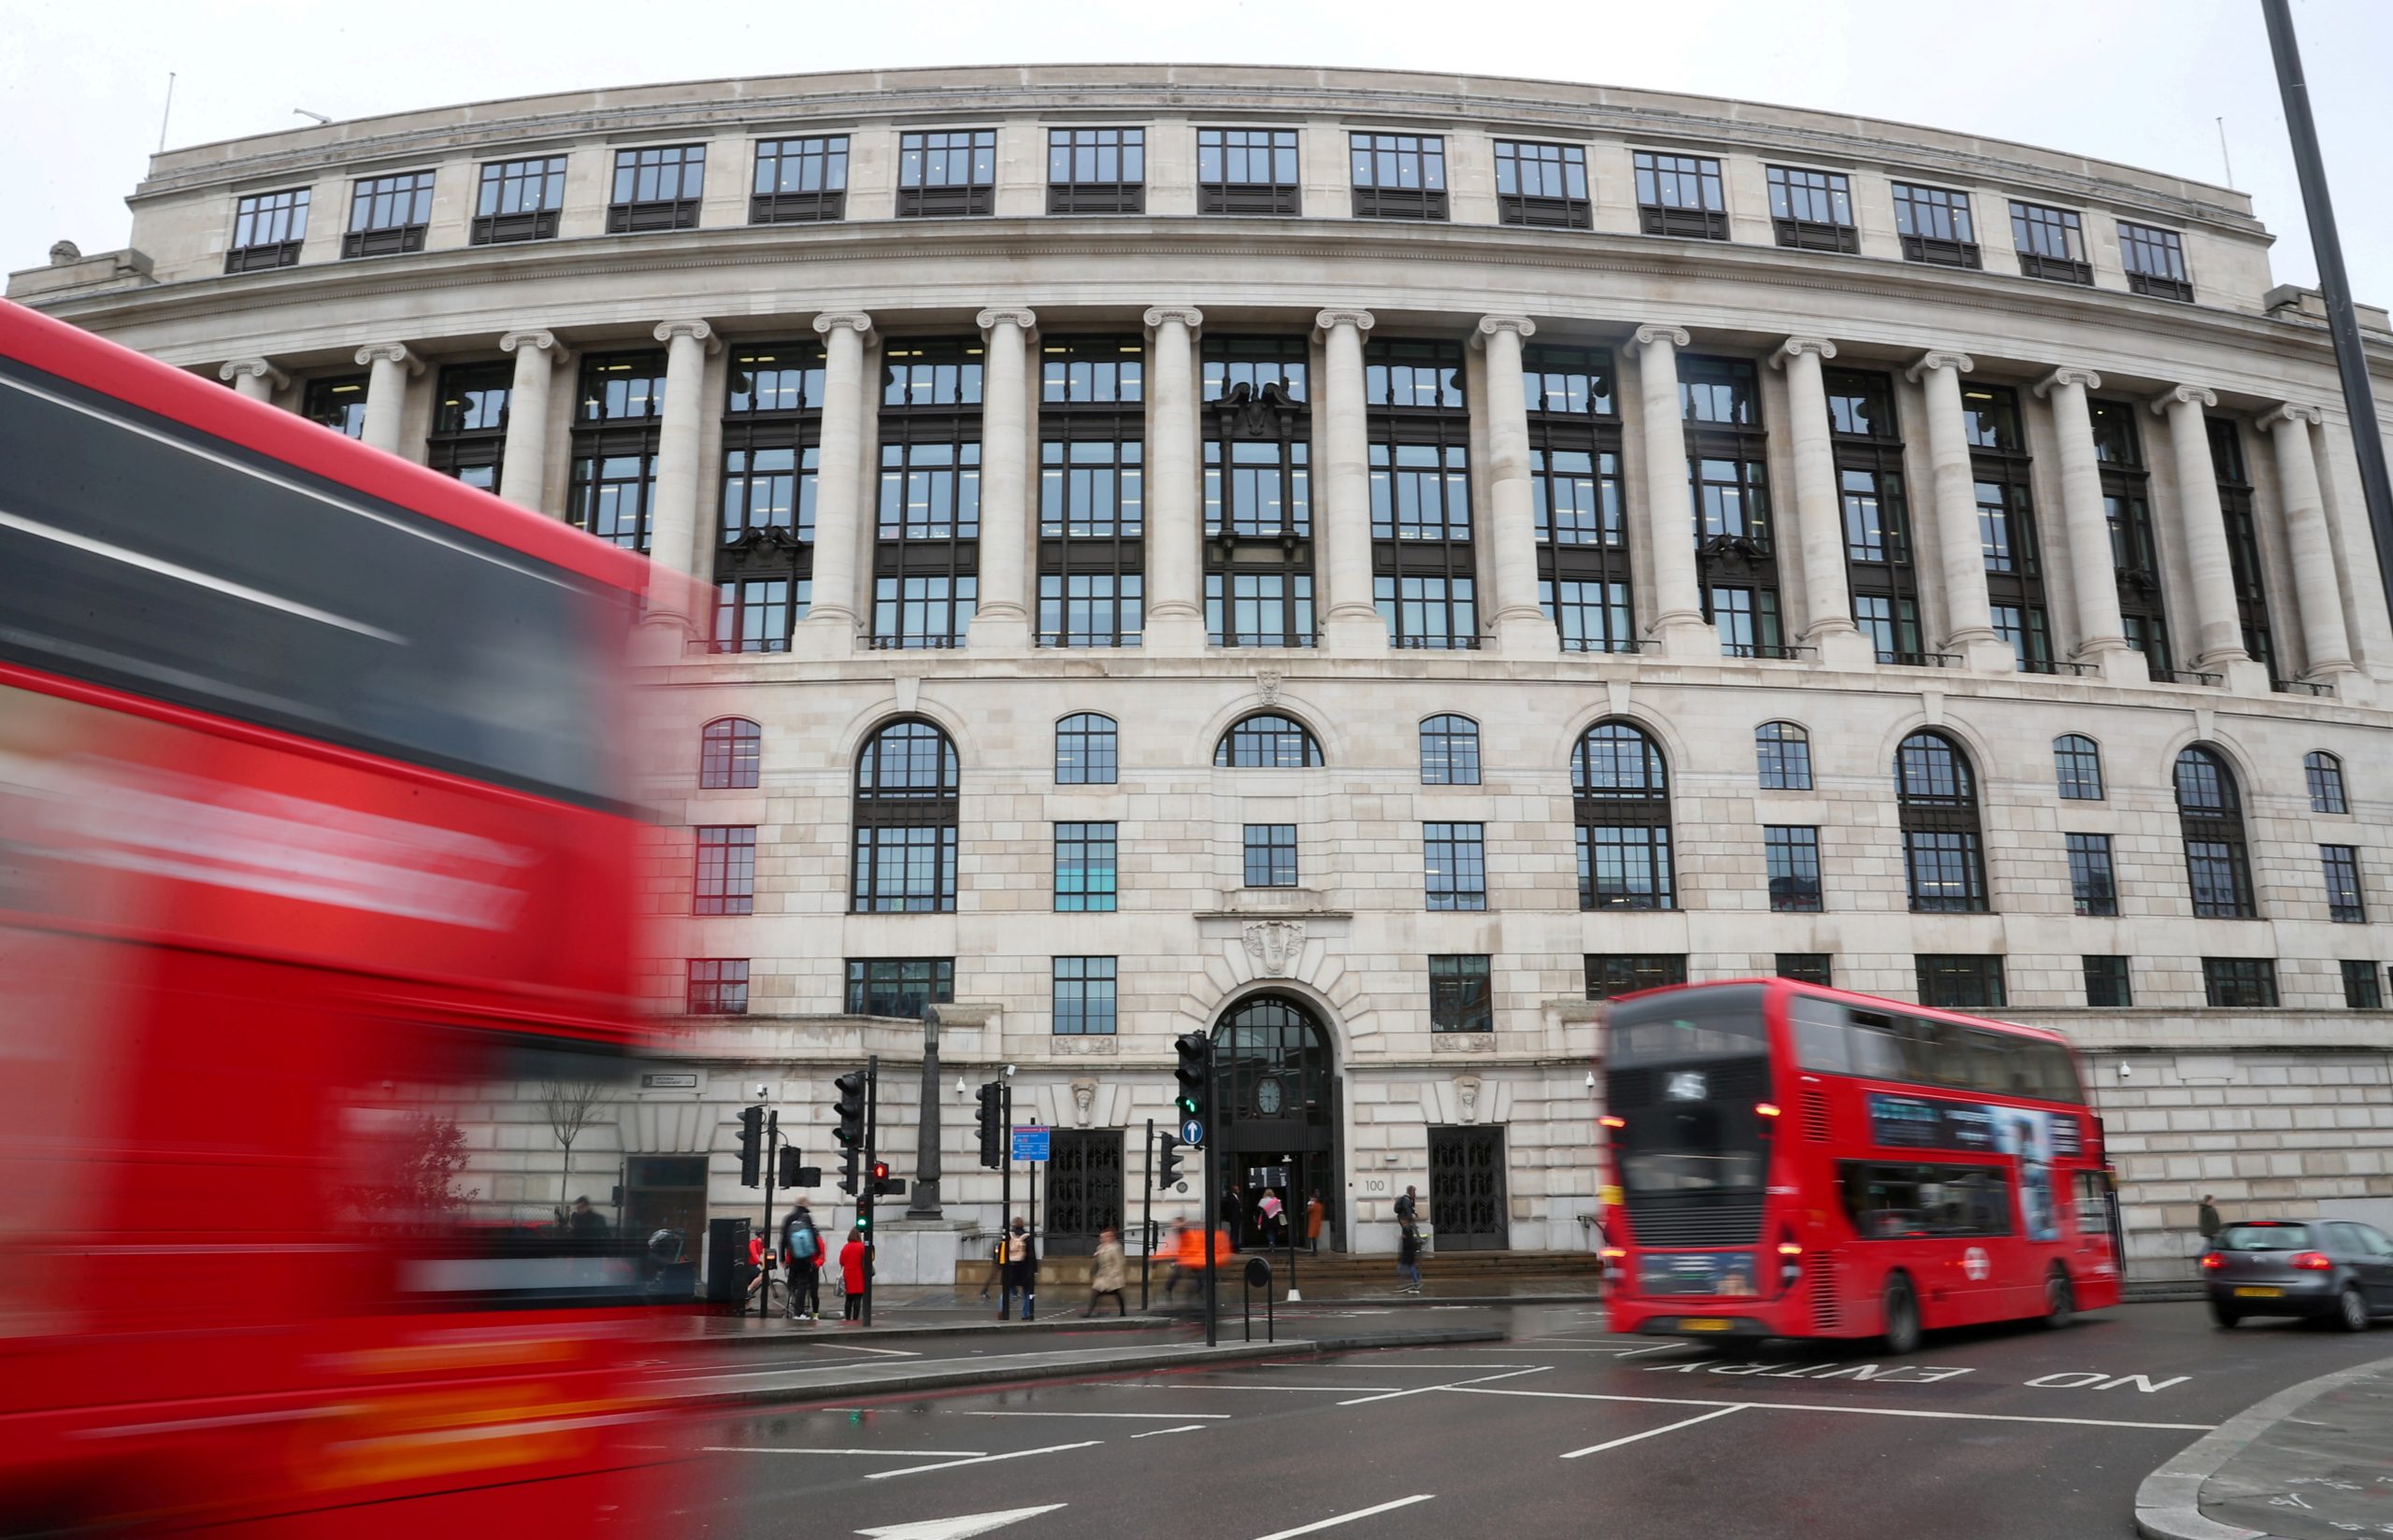 FILE PHOTO: Traffic and people pass by the front of the Unilever building in central London FILE PHOTO: Traffic and people pass by the front of the Unilever building in central London, Britain, March 15, 2018. REUTERS/ Hannah McKay/File Photo Hannah Mckay